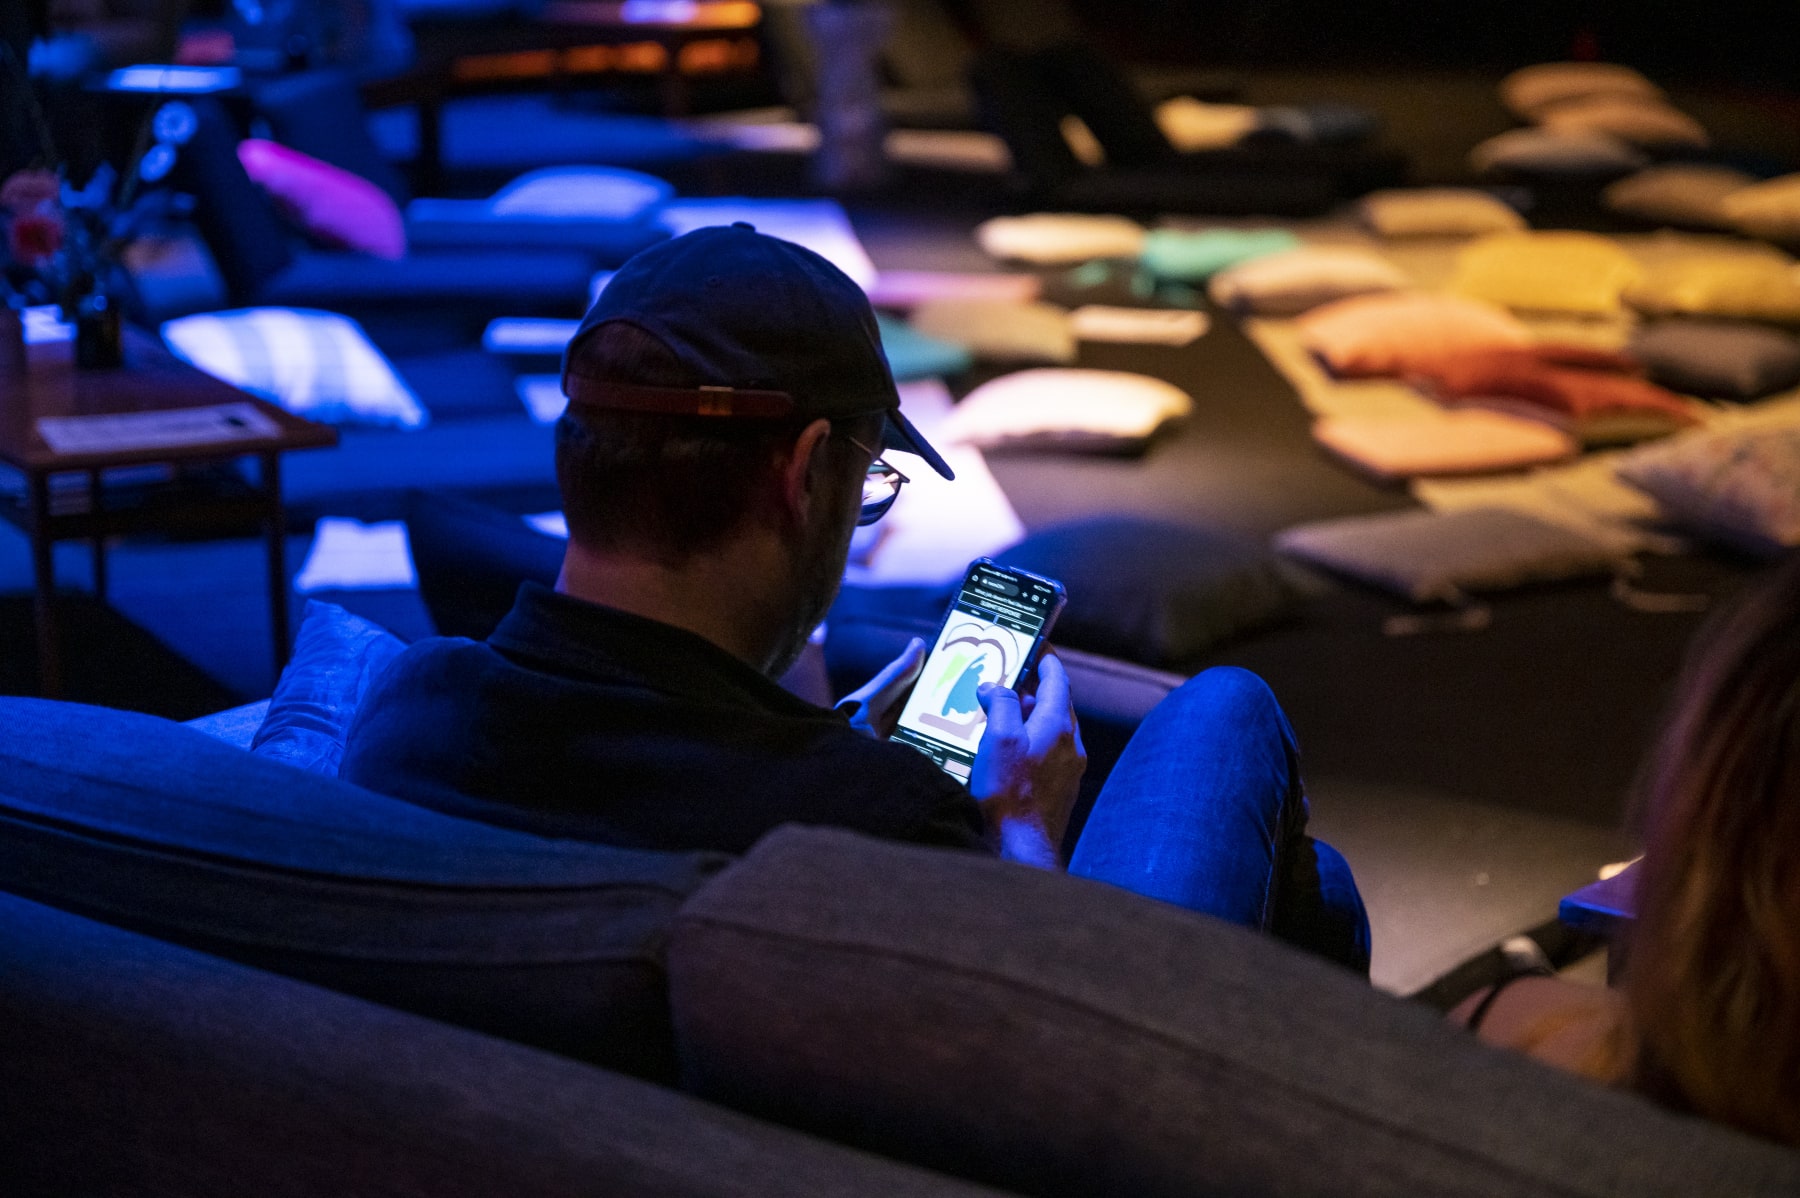 A person wearing a cap and glasses is drawing on their mobile phone. They are sitting on a couch and their back is to the camera. In the background there are cushions on the floor. There are coloured lights.